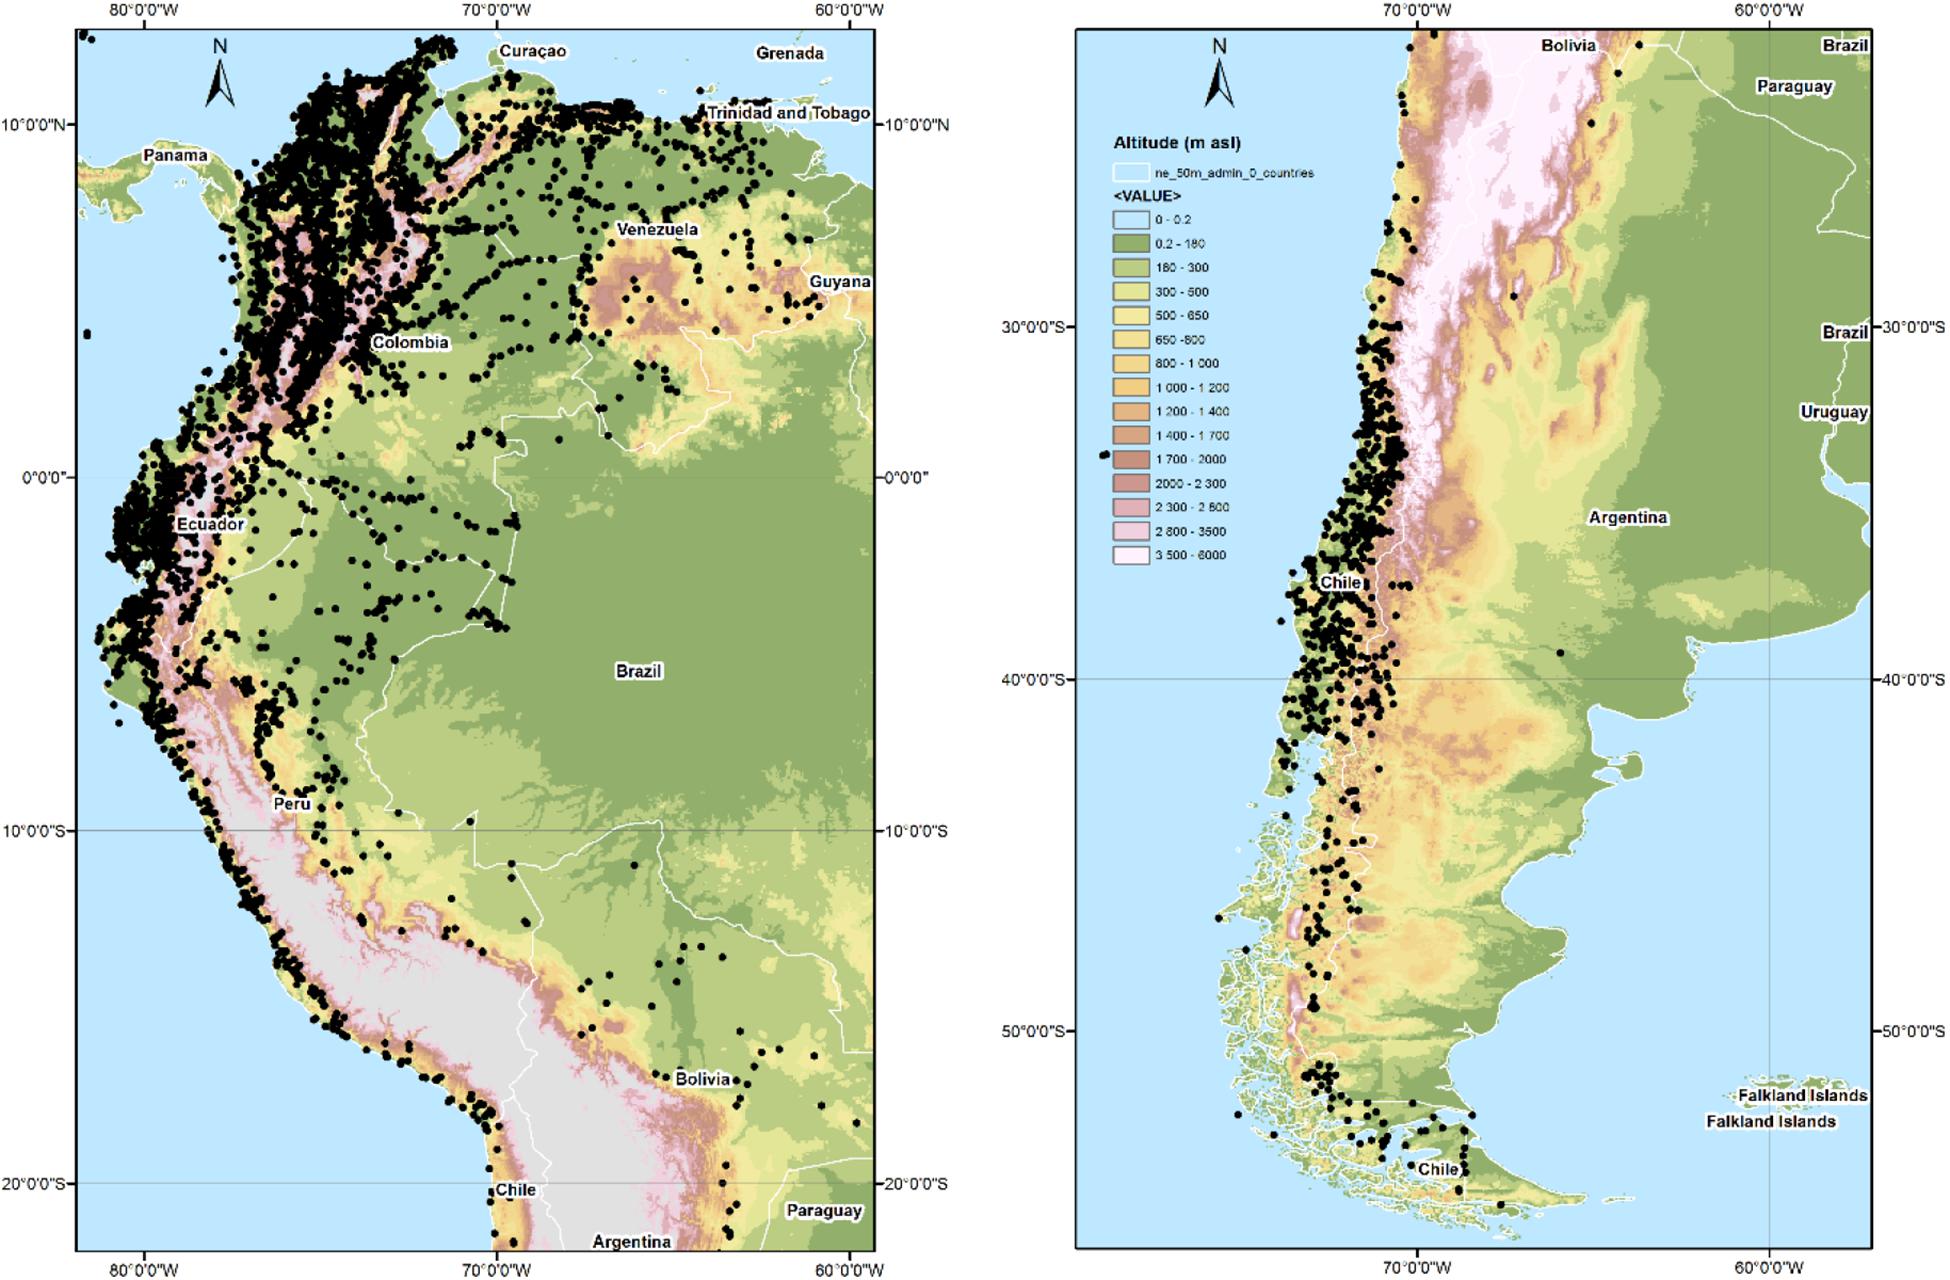 Frontiers Climatological And Hydrological Observations For The South American Andes In Situ Stations Satellite And Reanalysis Data Sets Earth Science